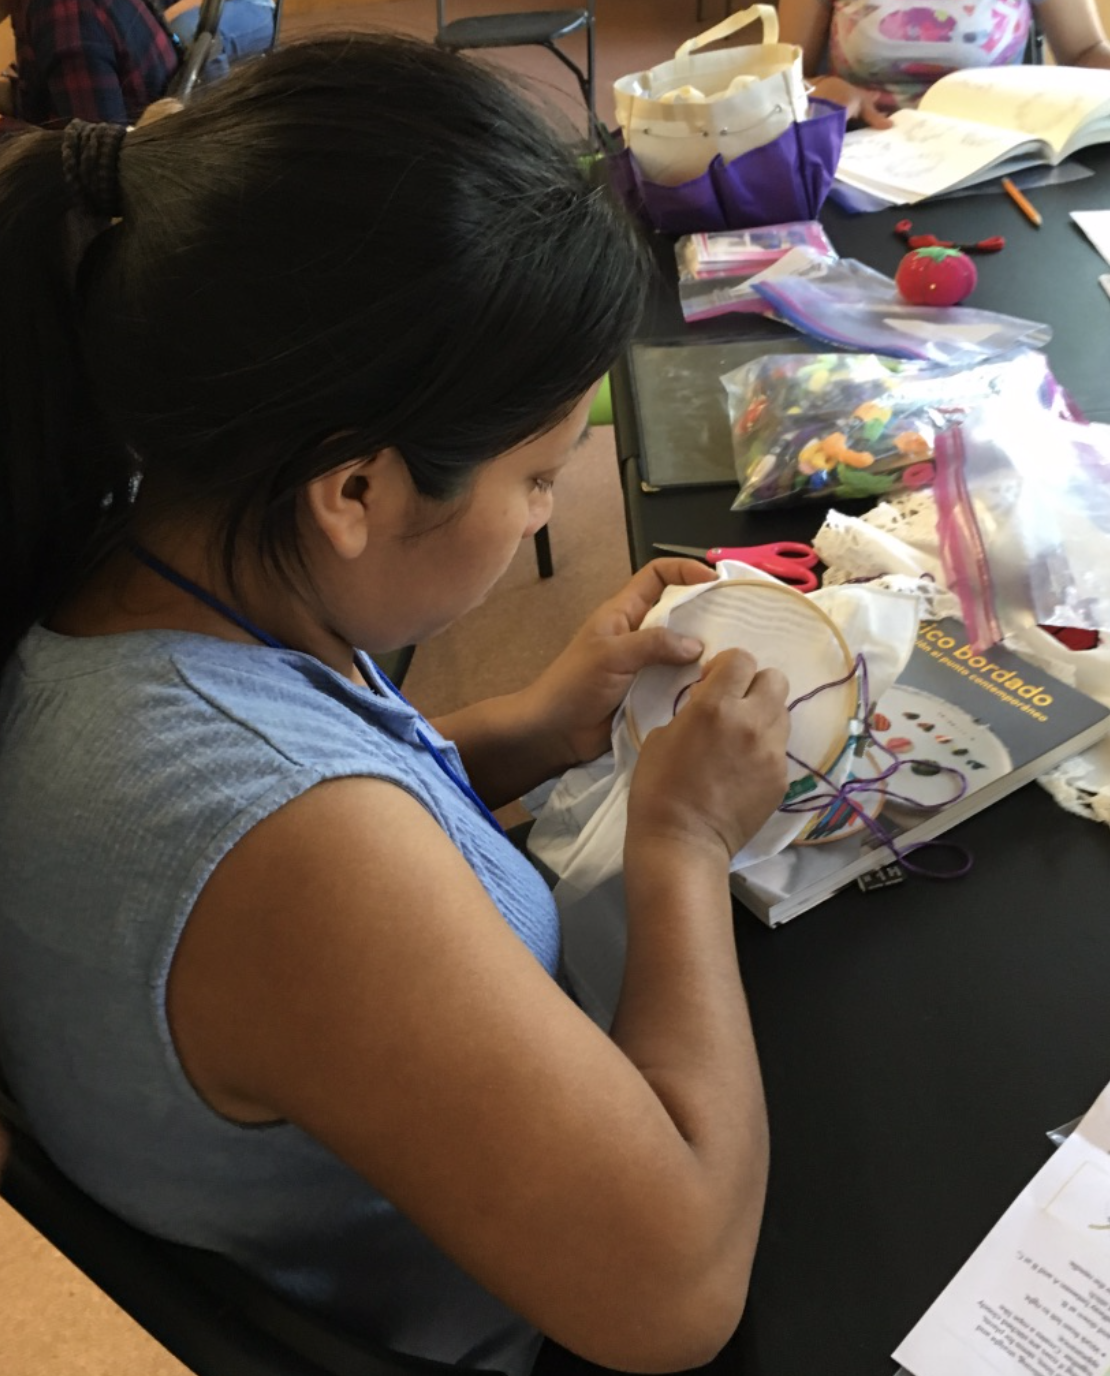 A migrant woman embroiders at the Casa Alitas monastery shelter for asylum seekers in Tucson, Ariz. (Photo provided by author)